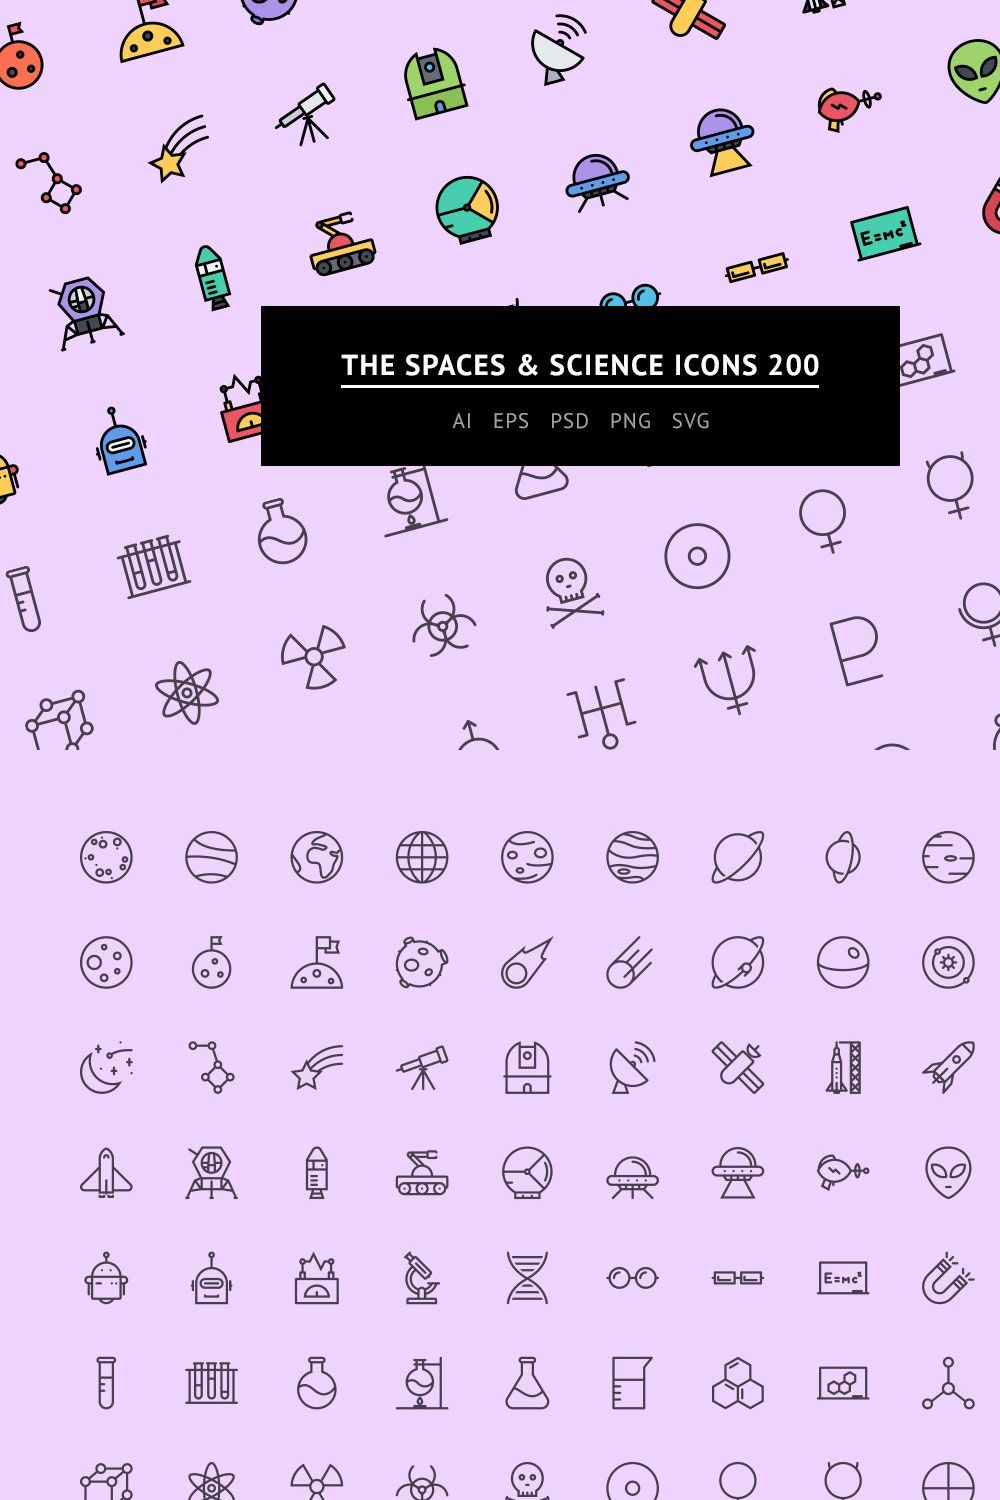 The Spaces & Science Icons 200 pinterest preview image.